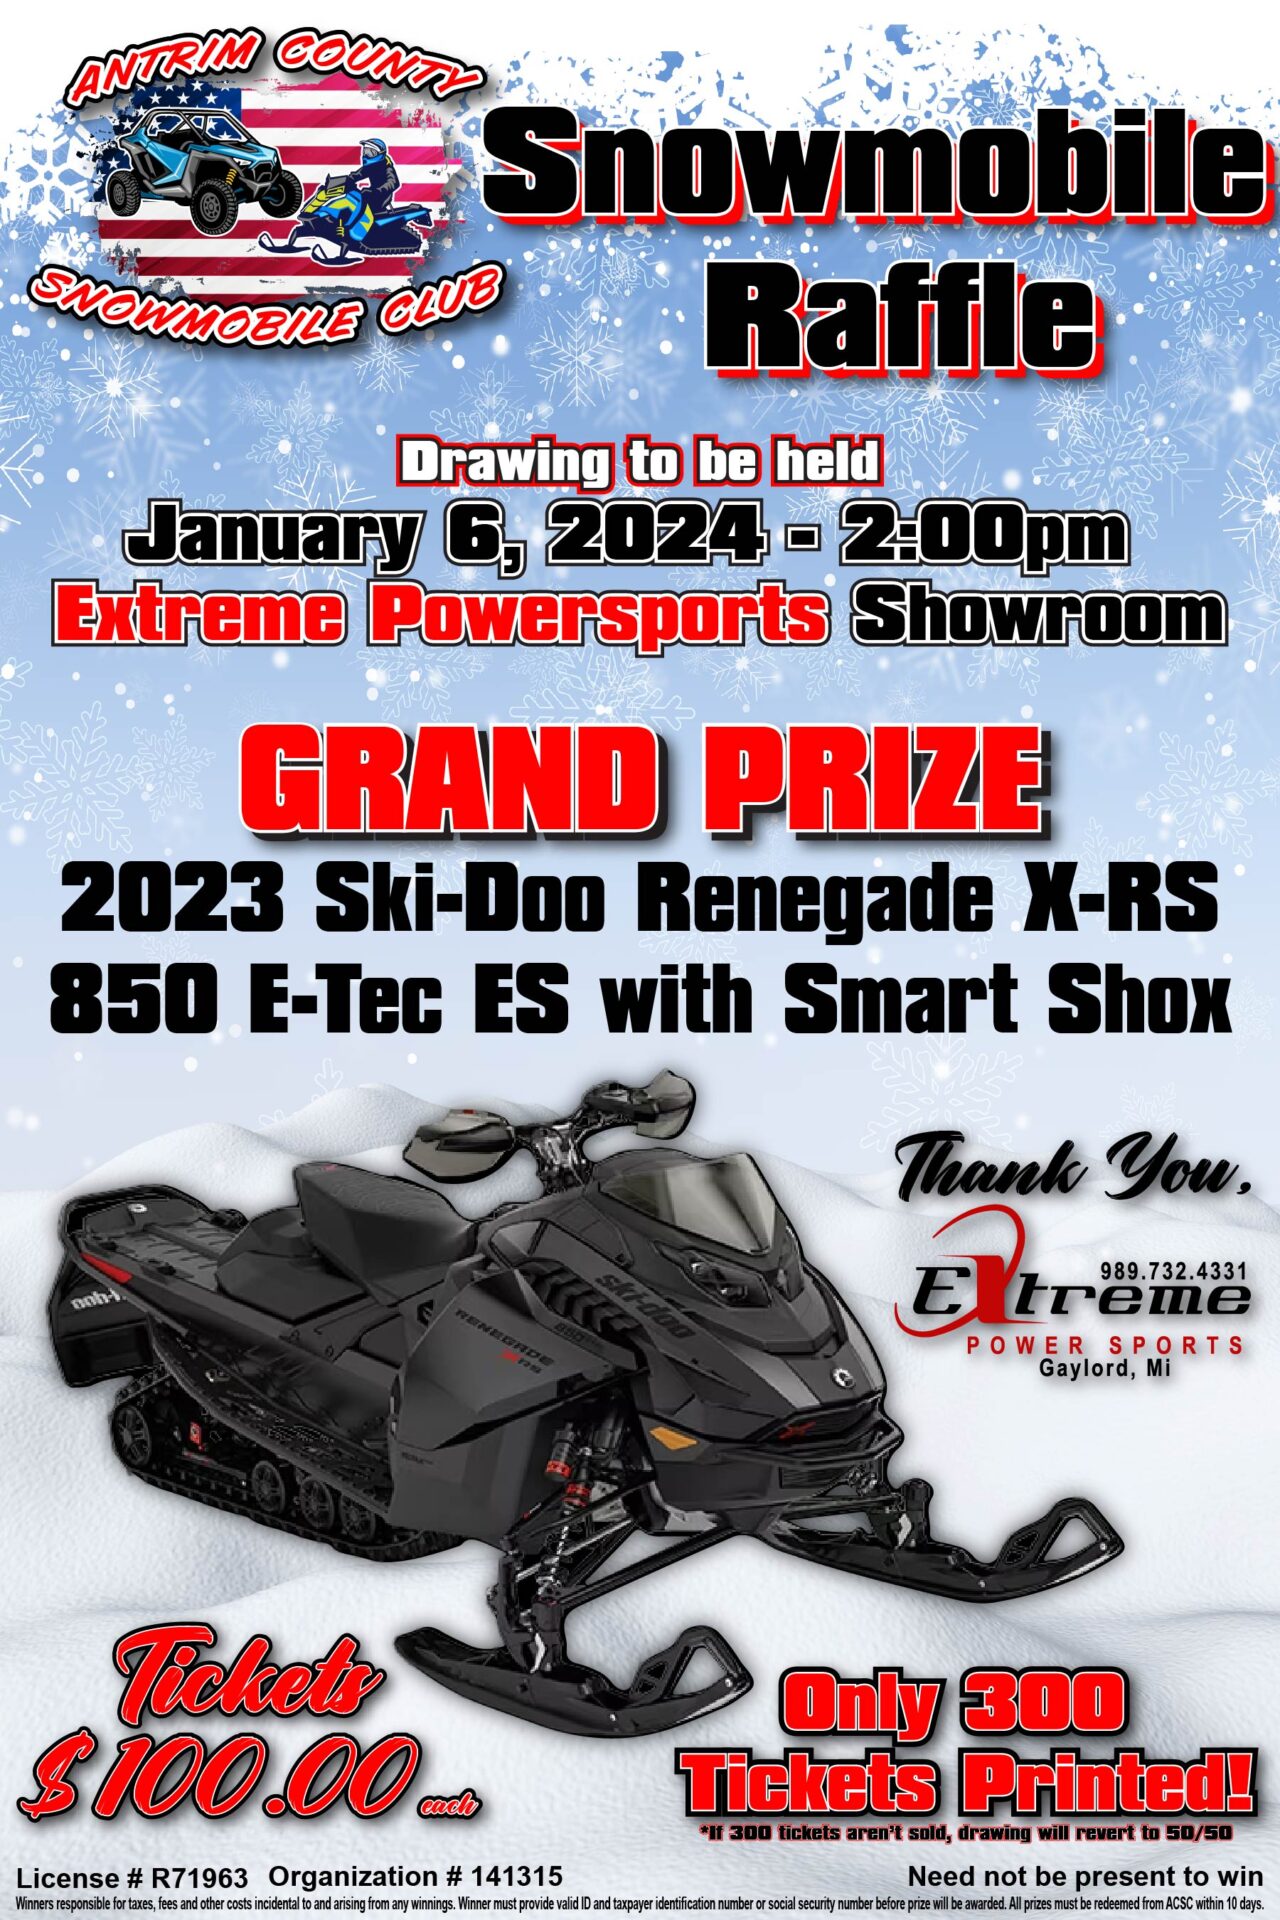 A poster for the extreme powersports showroom grand prize.